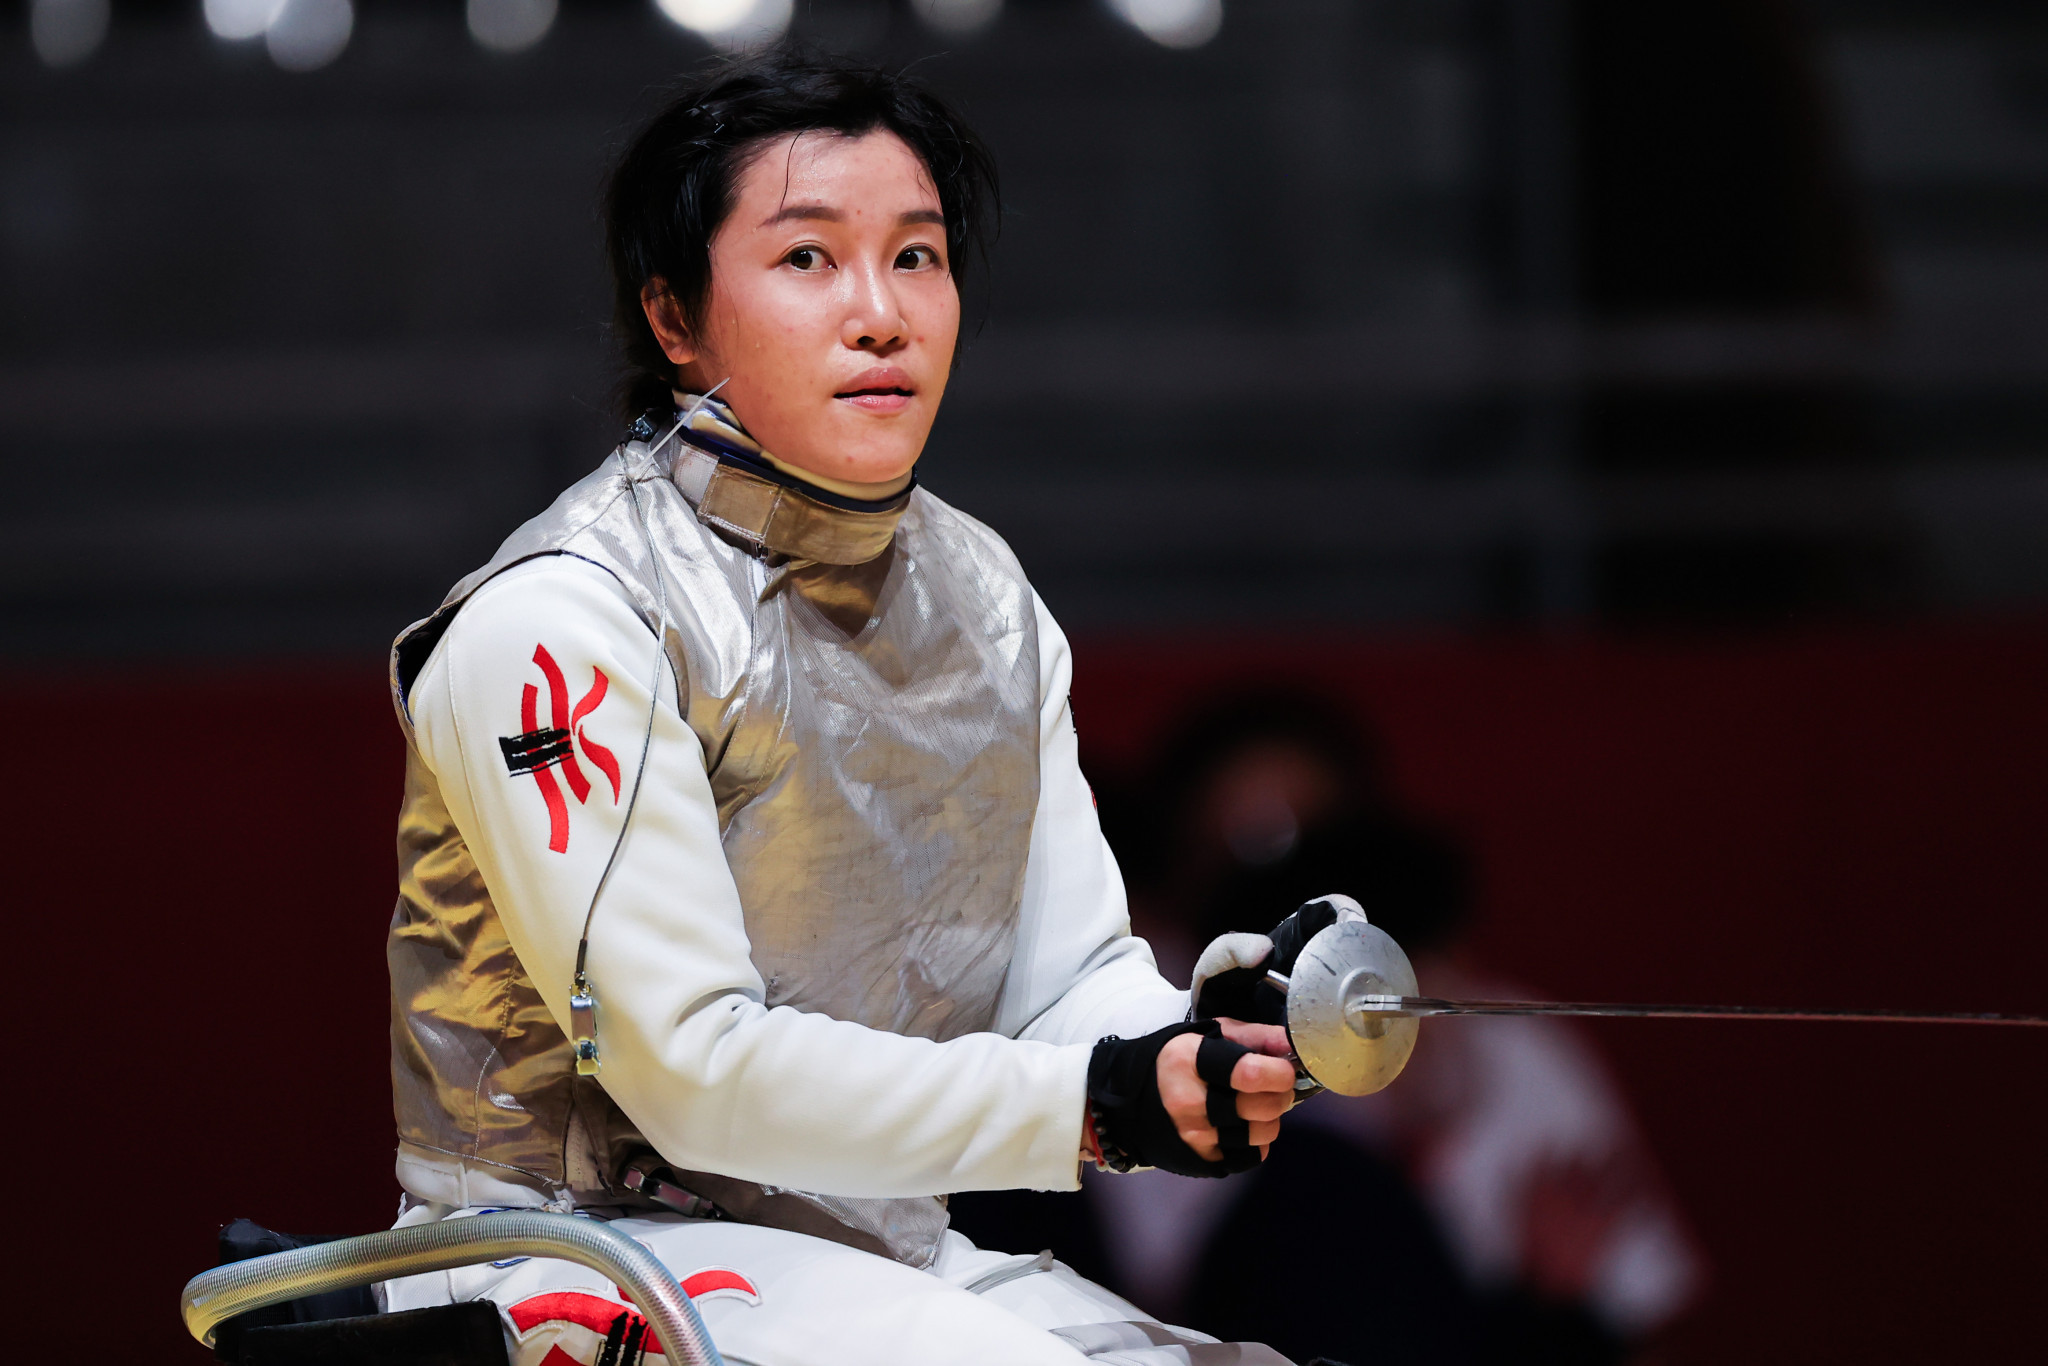 Seven-time Paralympic gold medallist Yu Chui Yee rolls back the years to claim women’s épée category A title at IWAS Wheelchair Fencing World Cup